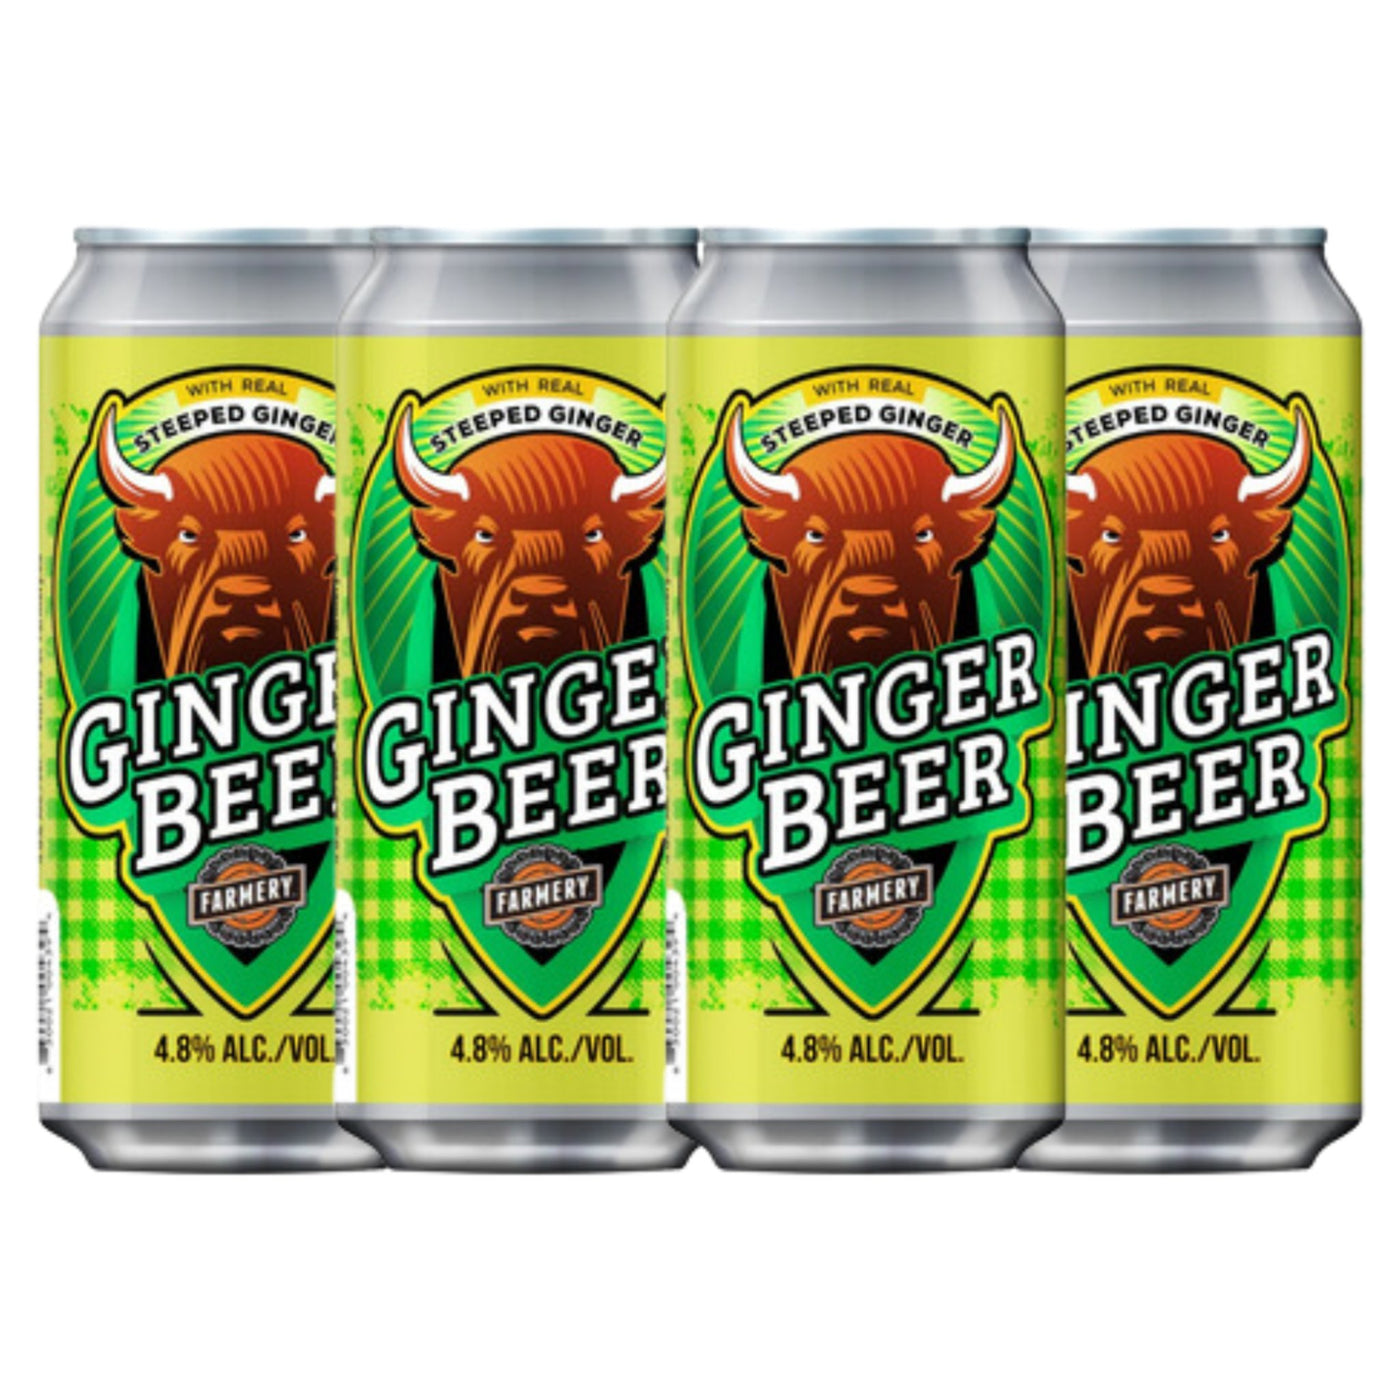 Ginger Beer - Farmery Estate Brewing Company Inc.-